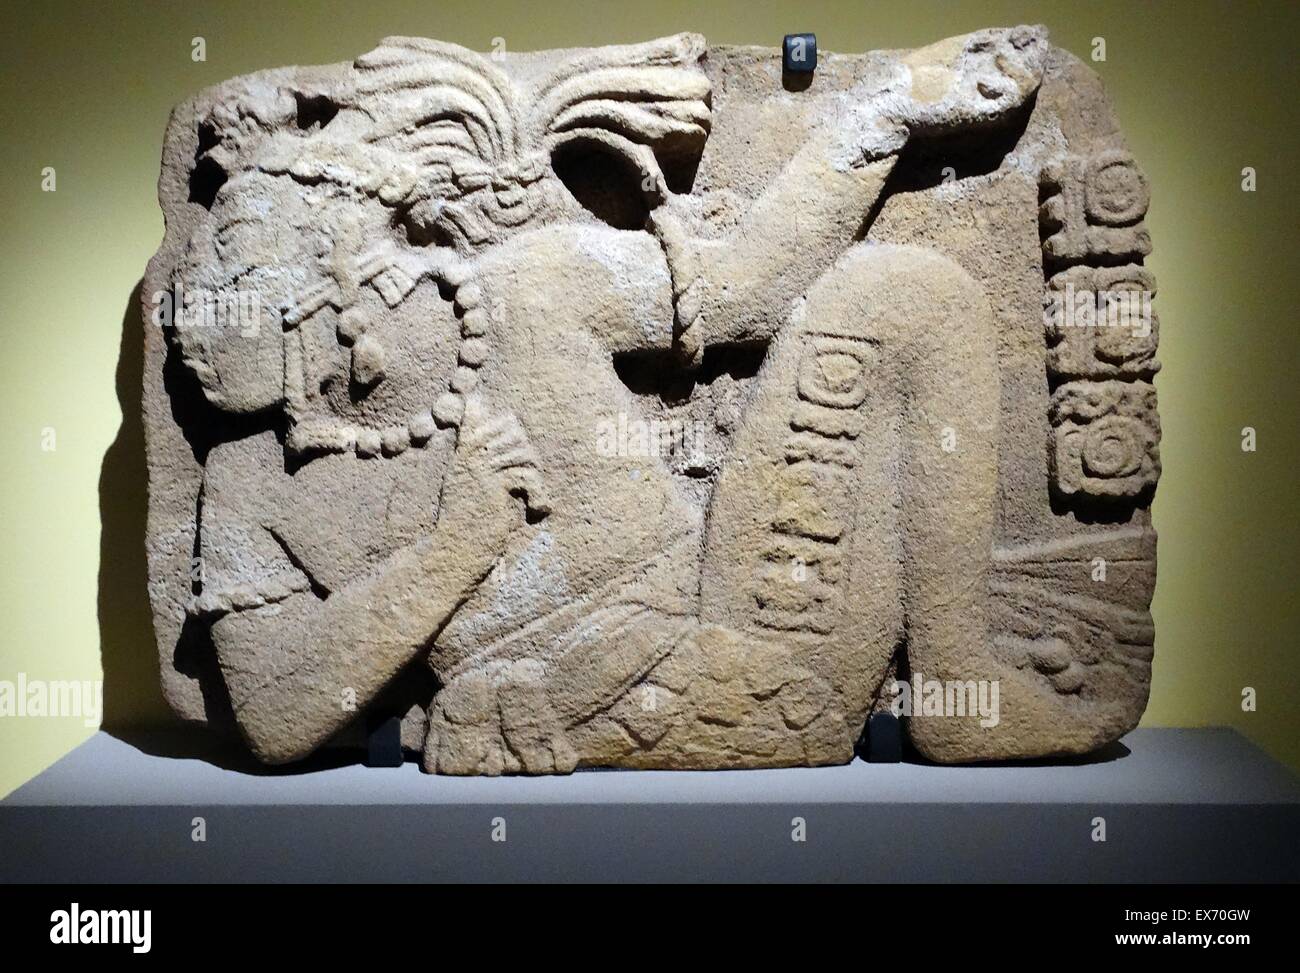 Relief depicting the Mayan King K'inich K'an Joy Chitam as a captive. Found at Tonina, Palenque Mexico 600-900 AD Stock Photo